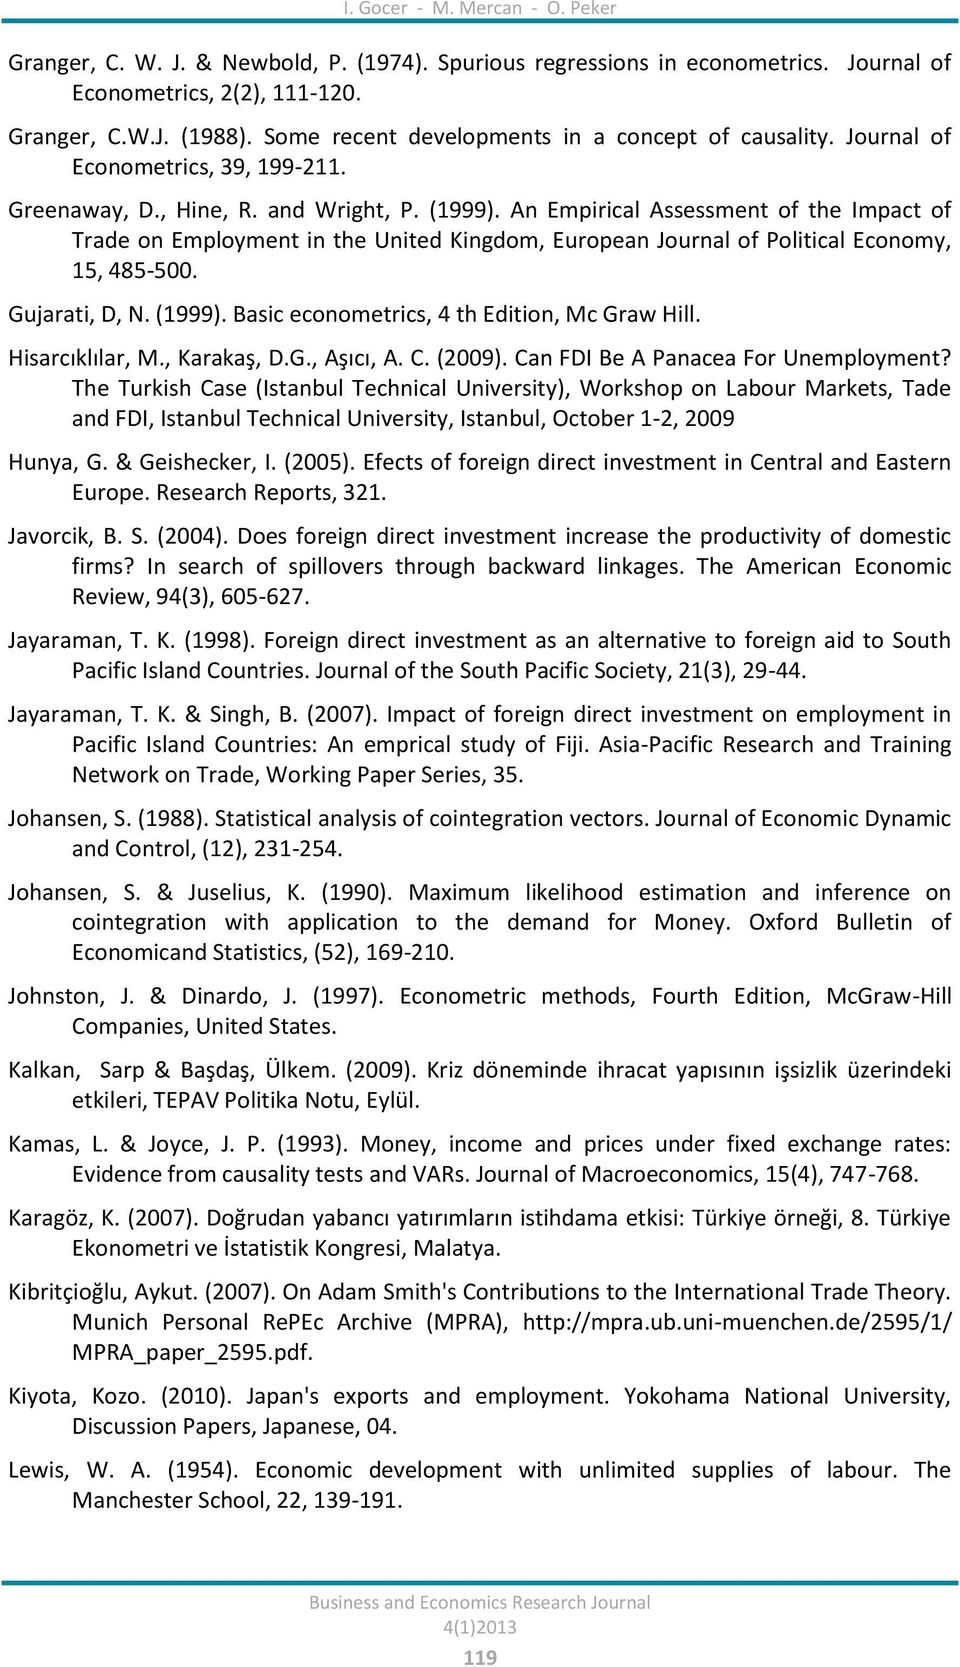 An Epirical Assessent of the Ipact of Trade on Eployent in the Uned Kingdo, European Journal of Polical Econoy, 15, 485-500. Gujarati, D, N. (1999). Basic econoetrics, 4 th Edion, Mc Graw Hill.